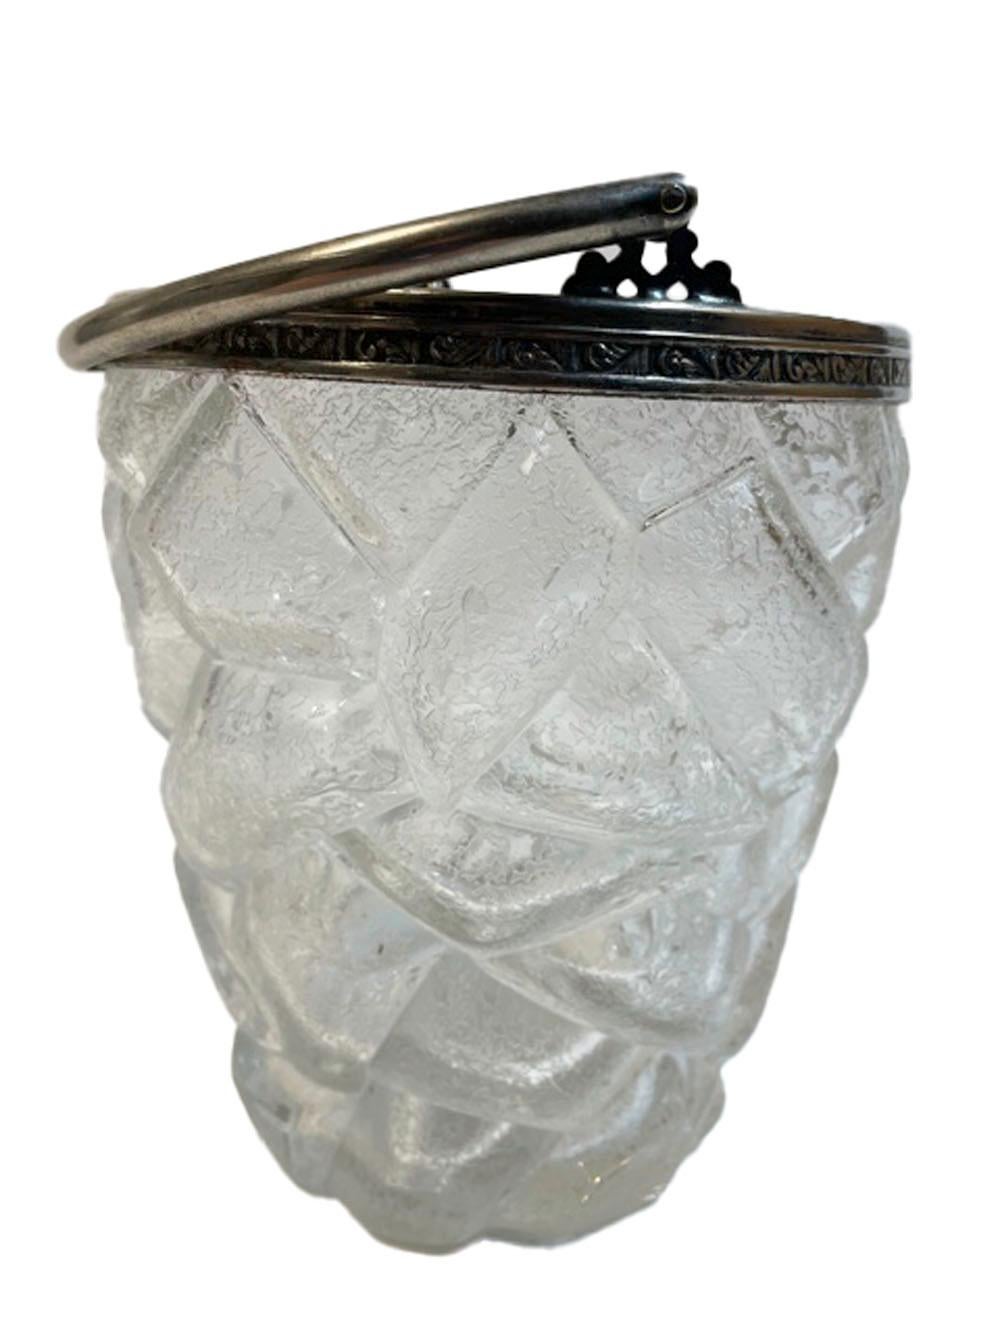 Art Deco Cracked Ice Molded Ice Bucket with Silver Plate Rim and Handle In Good Condition For Sale In Nantucket, MA